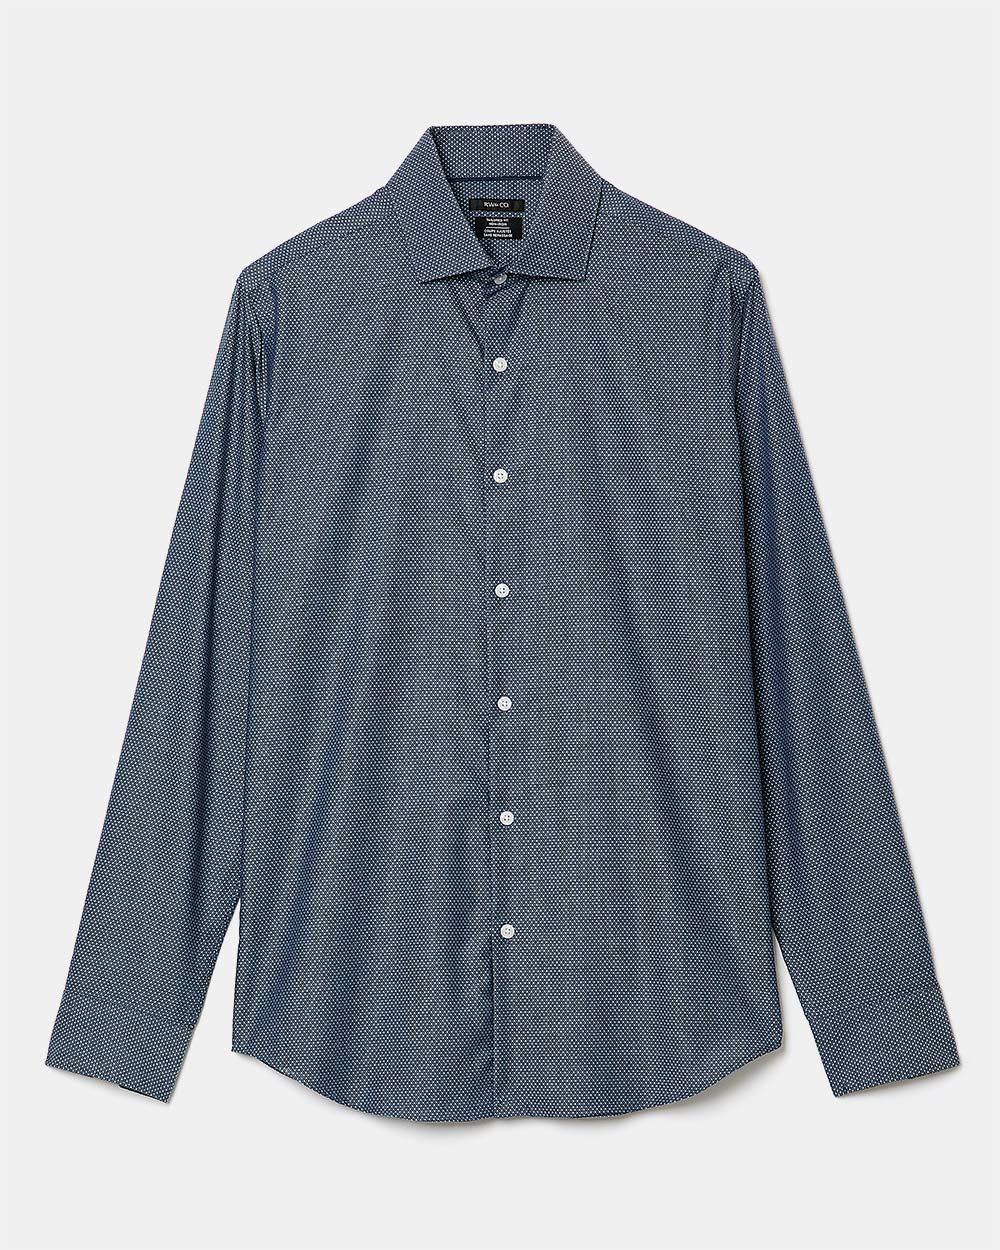 Tailored Fit Denim Dress Shirt with Dots | RW&CO.